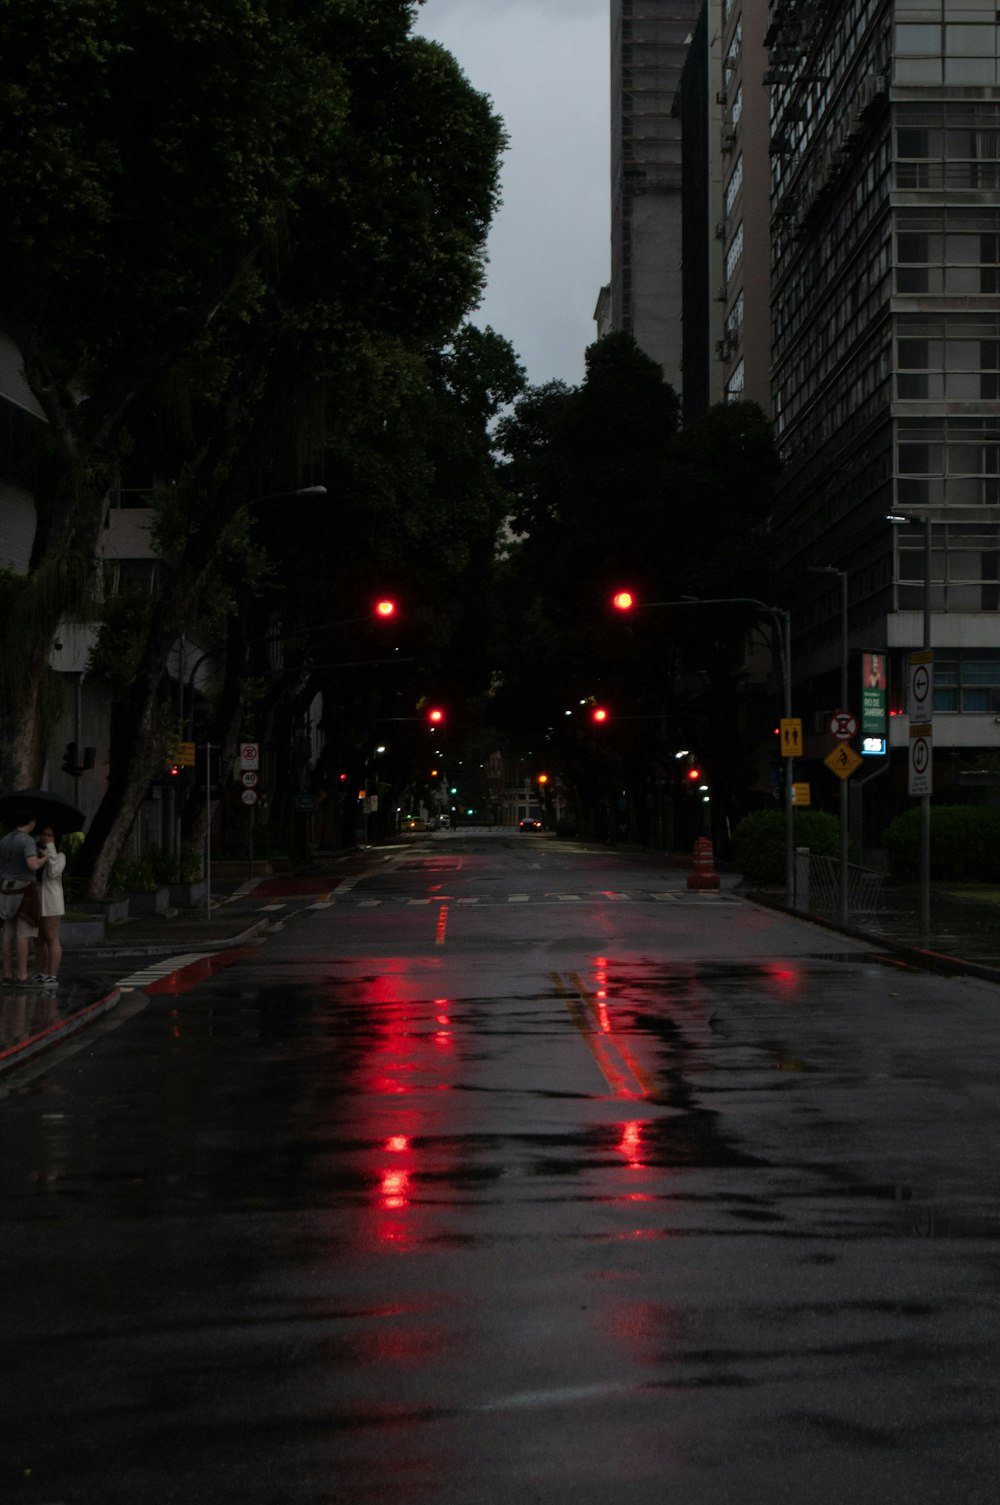 a city street at night with red traffic lights